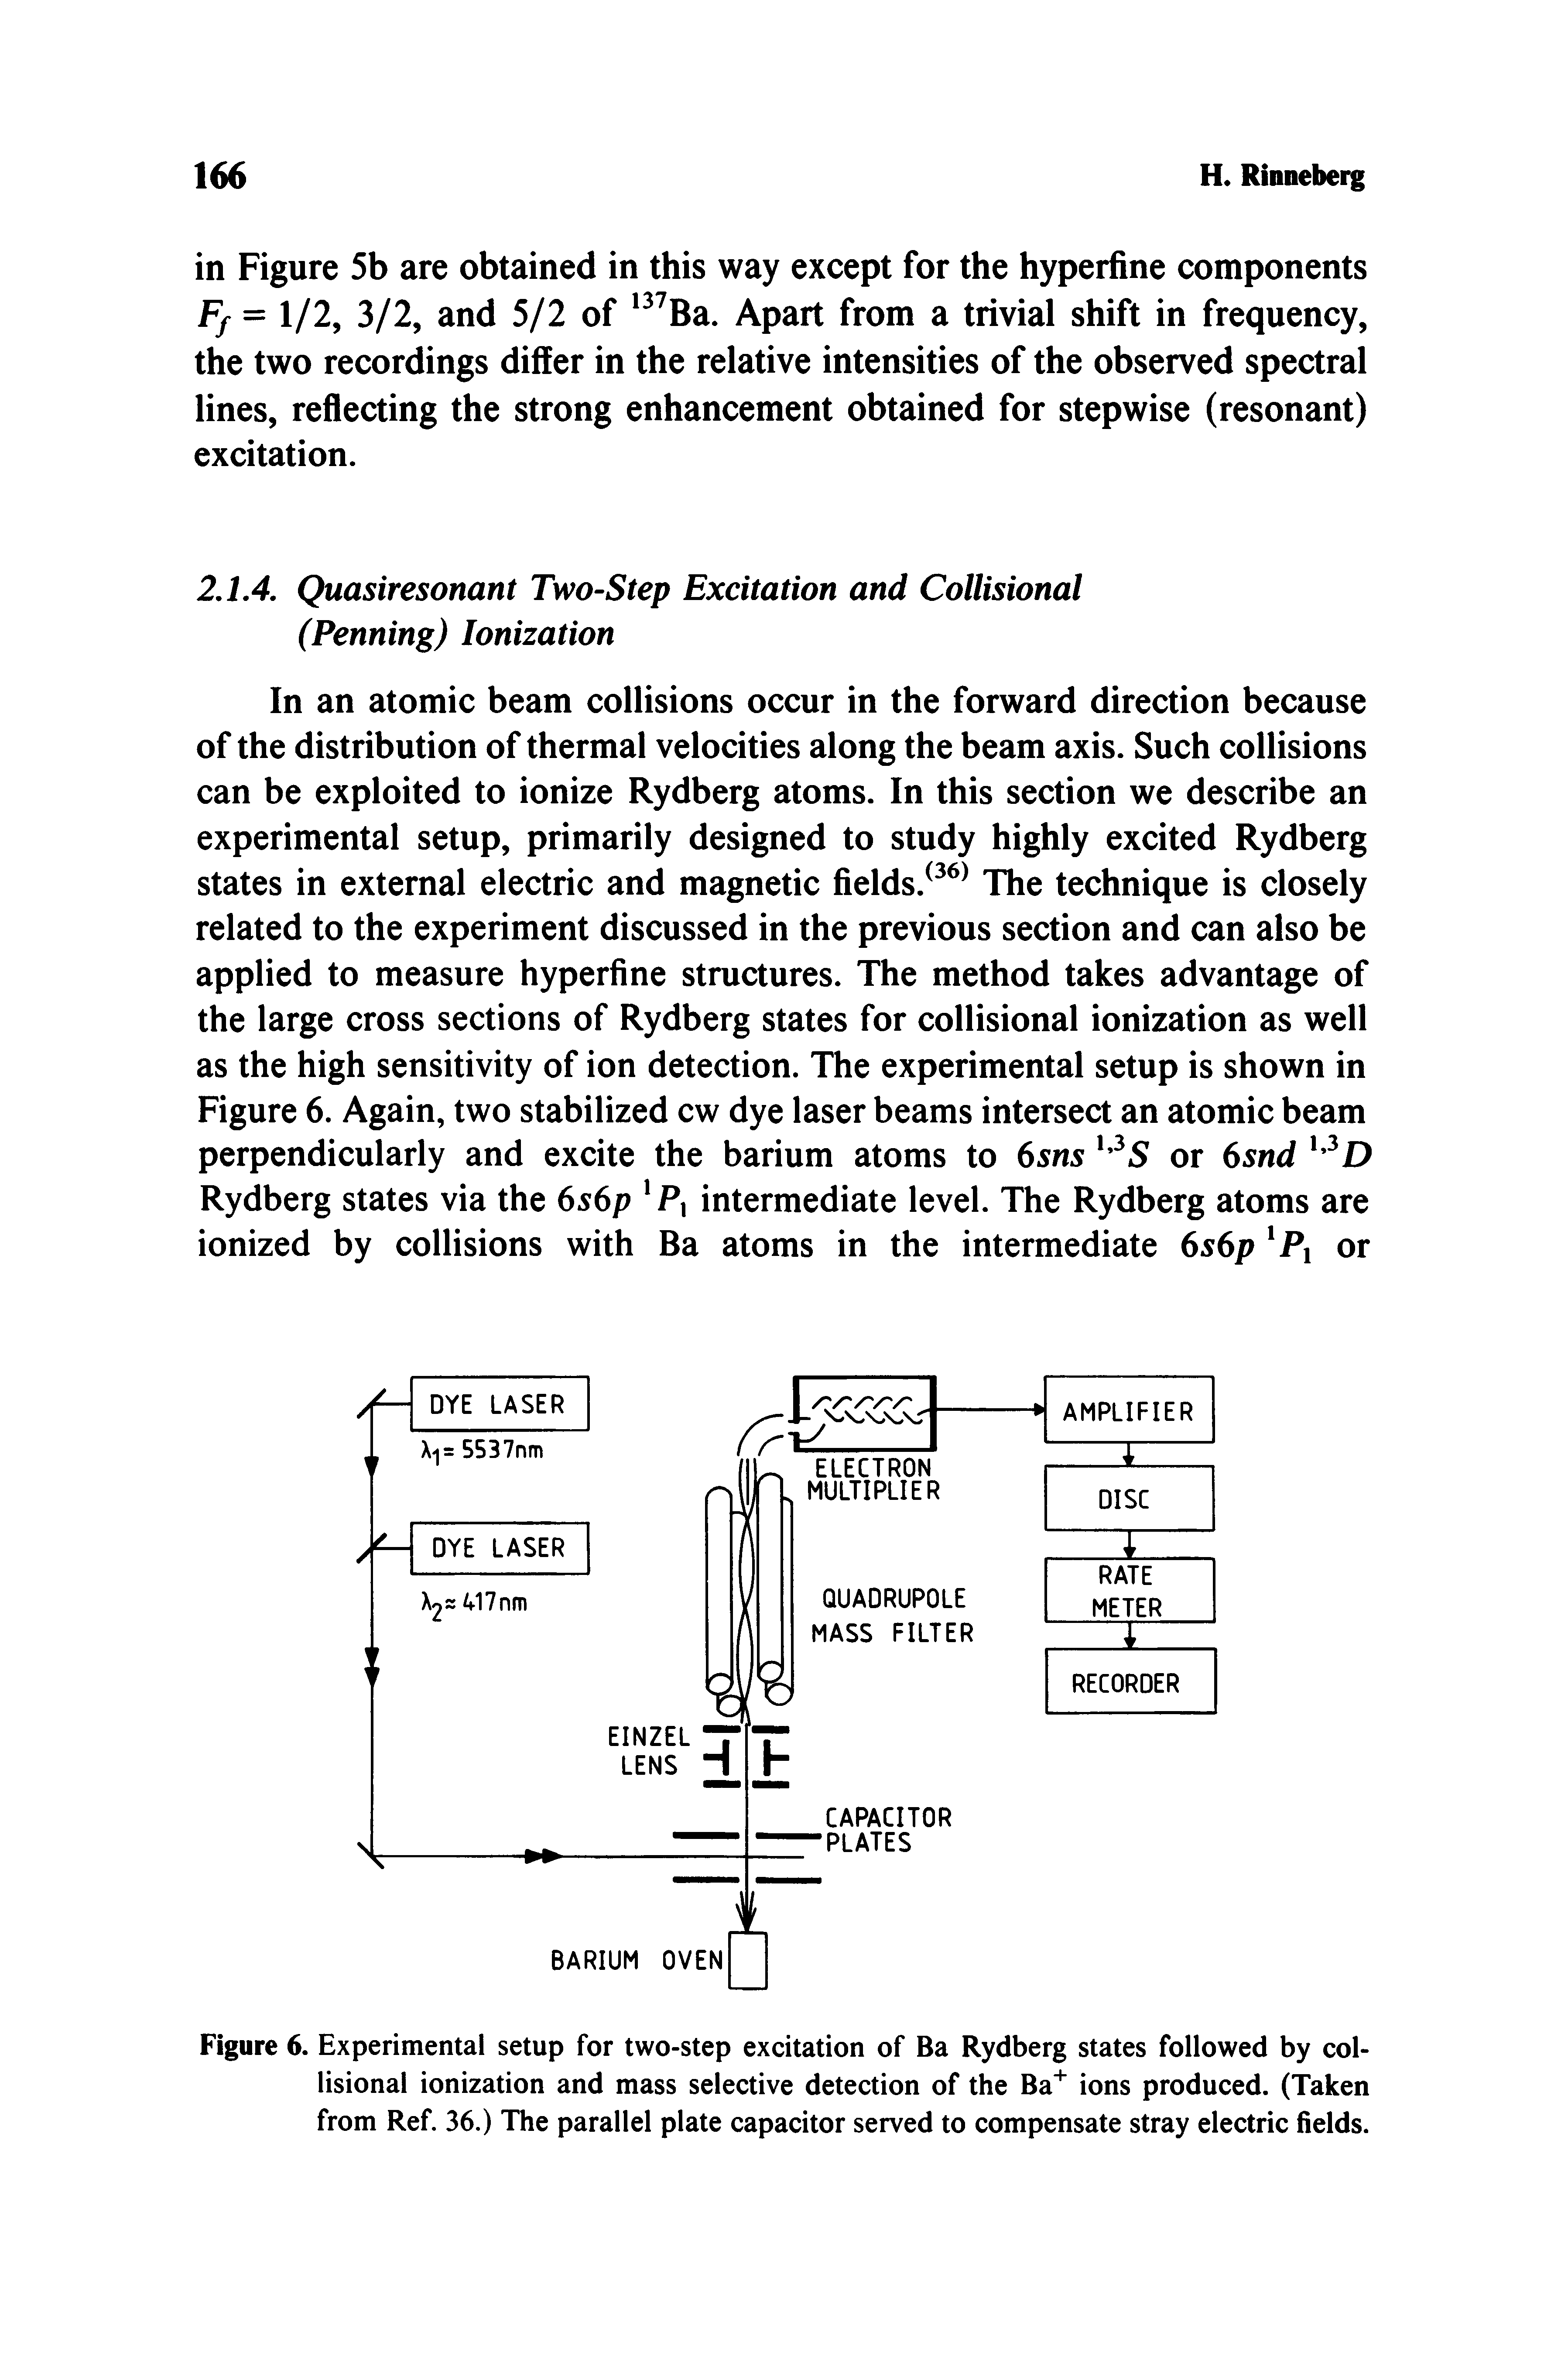 Figure 6. Experimental setup for two-step excitation of Ba Rydberg states followed by collisional ionization and mass selective detection of the Ba" ions produced. (Taken from Ref. 36.) The parallel plate capacitor served to compensate stray electric fields.